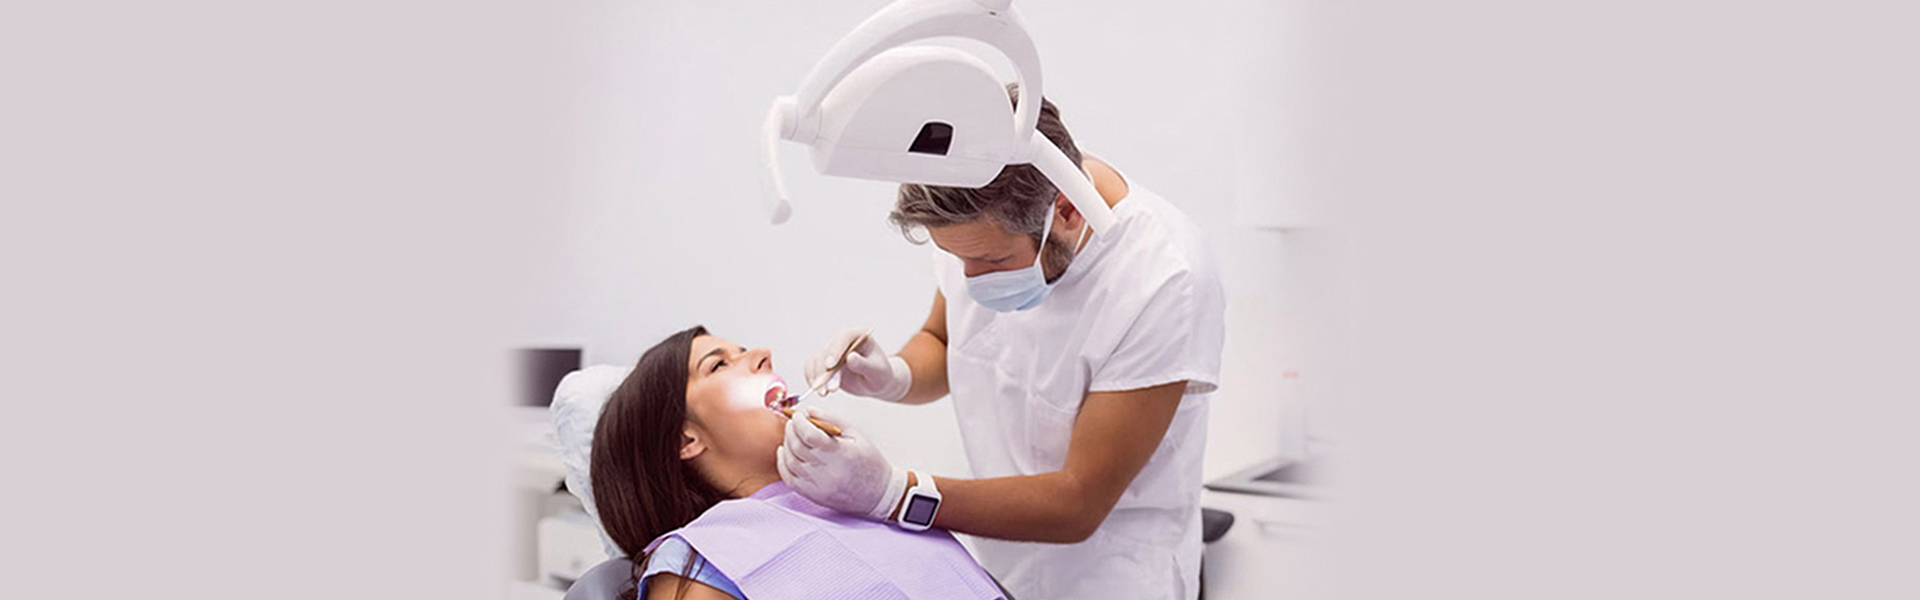 How does good oral hygiene prevent dental issues?